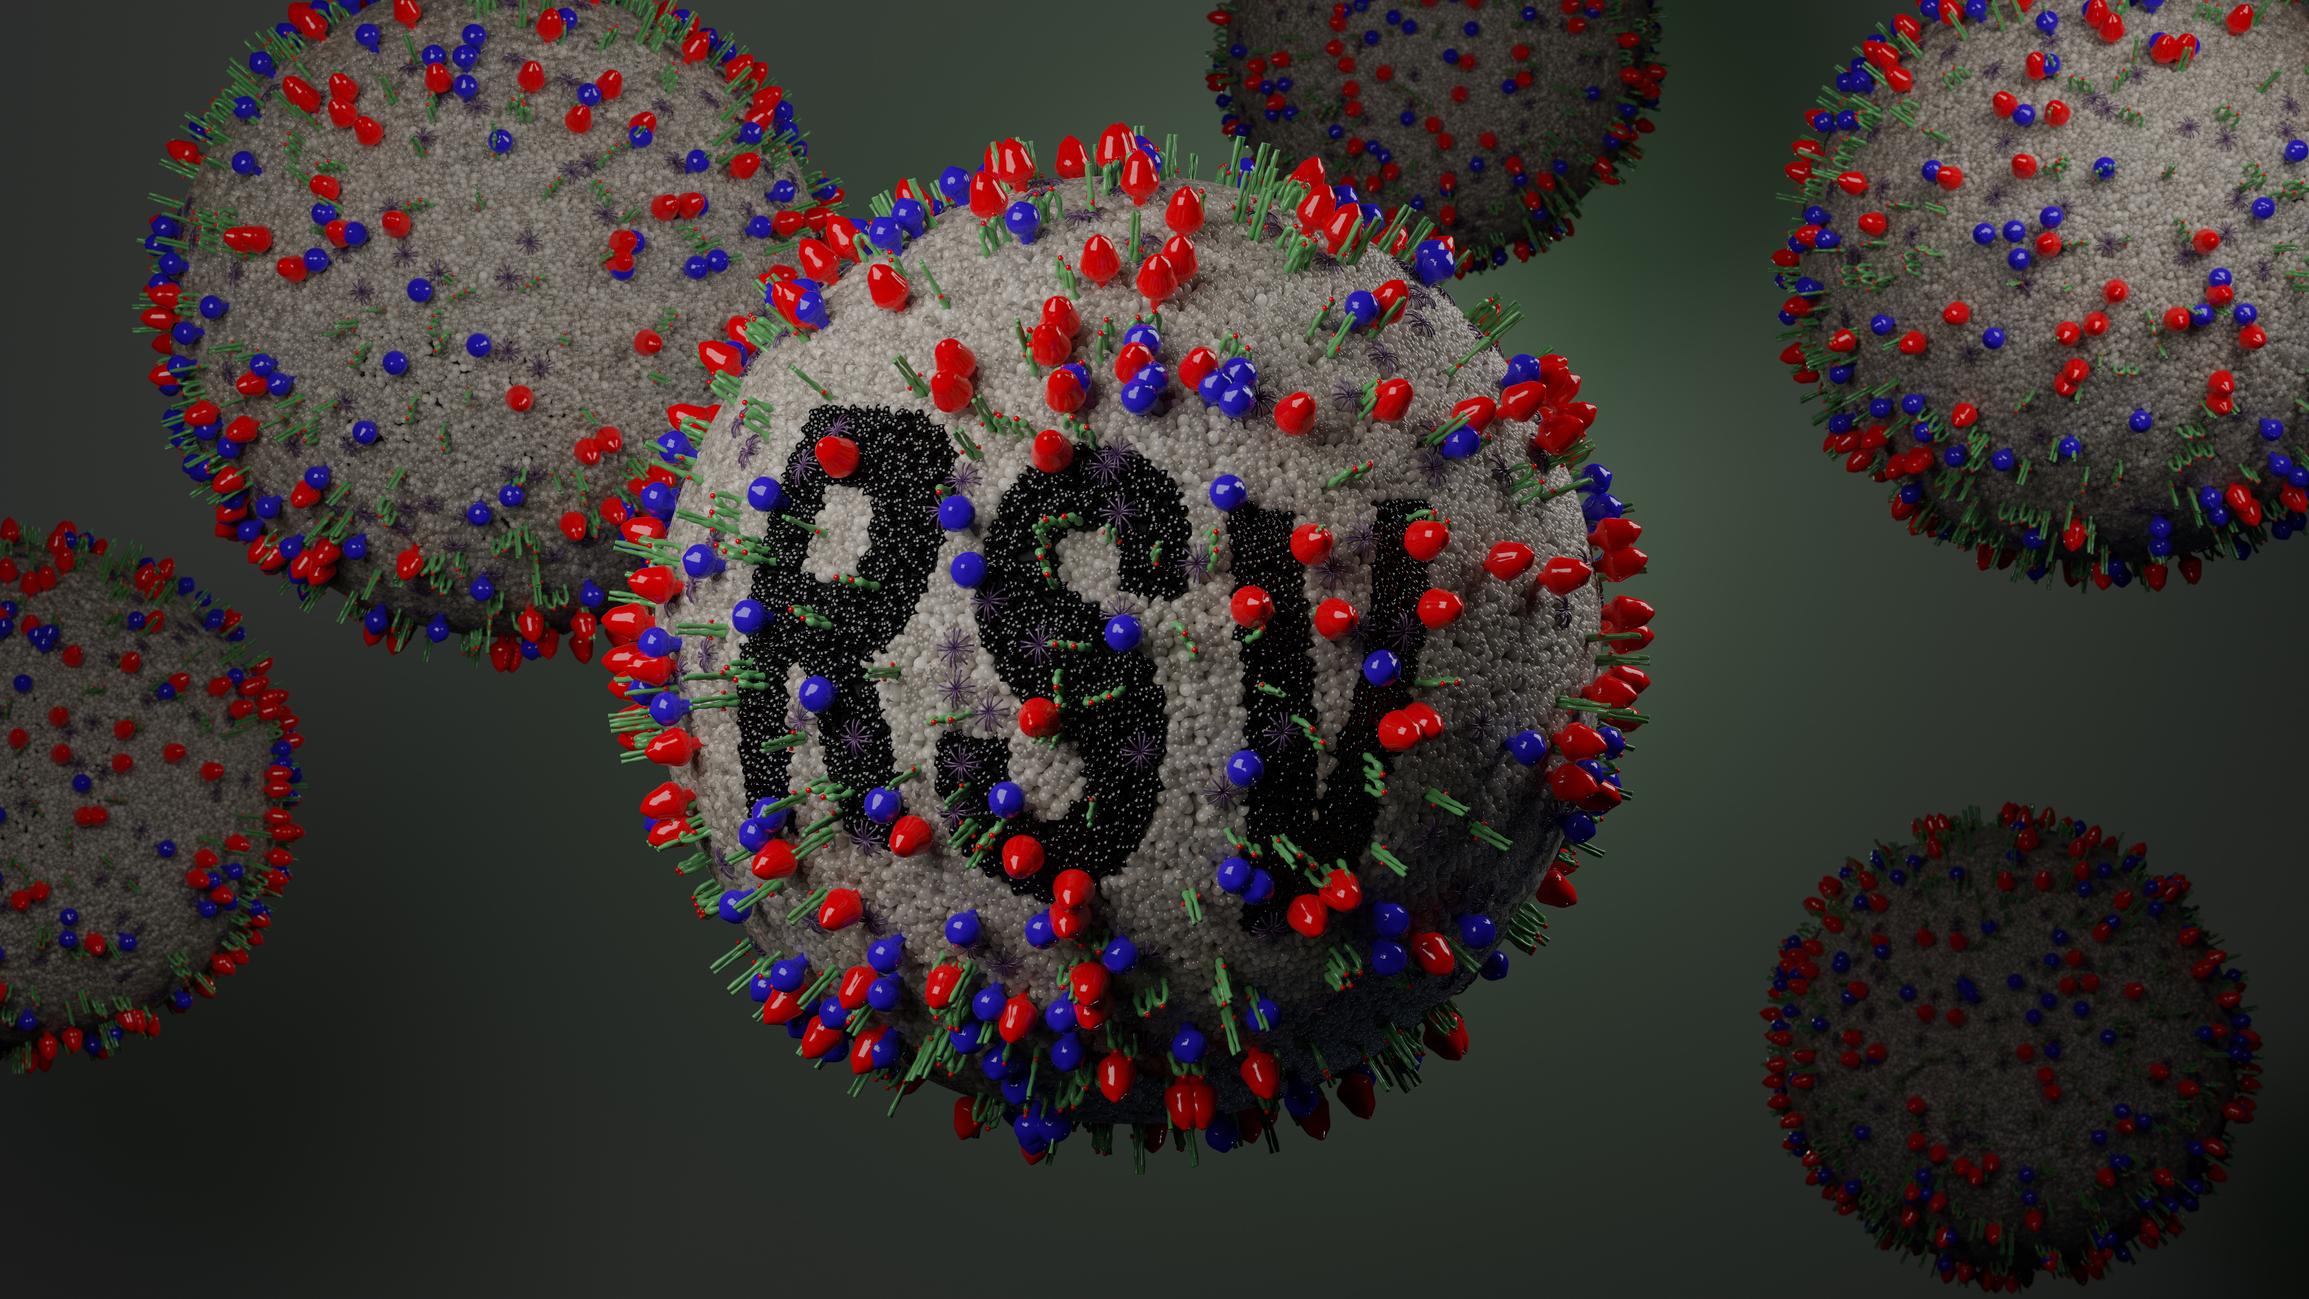 Illustration of Respiratory Syncytial Virus or RSV